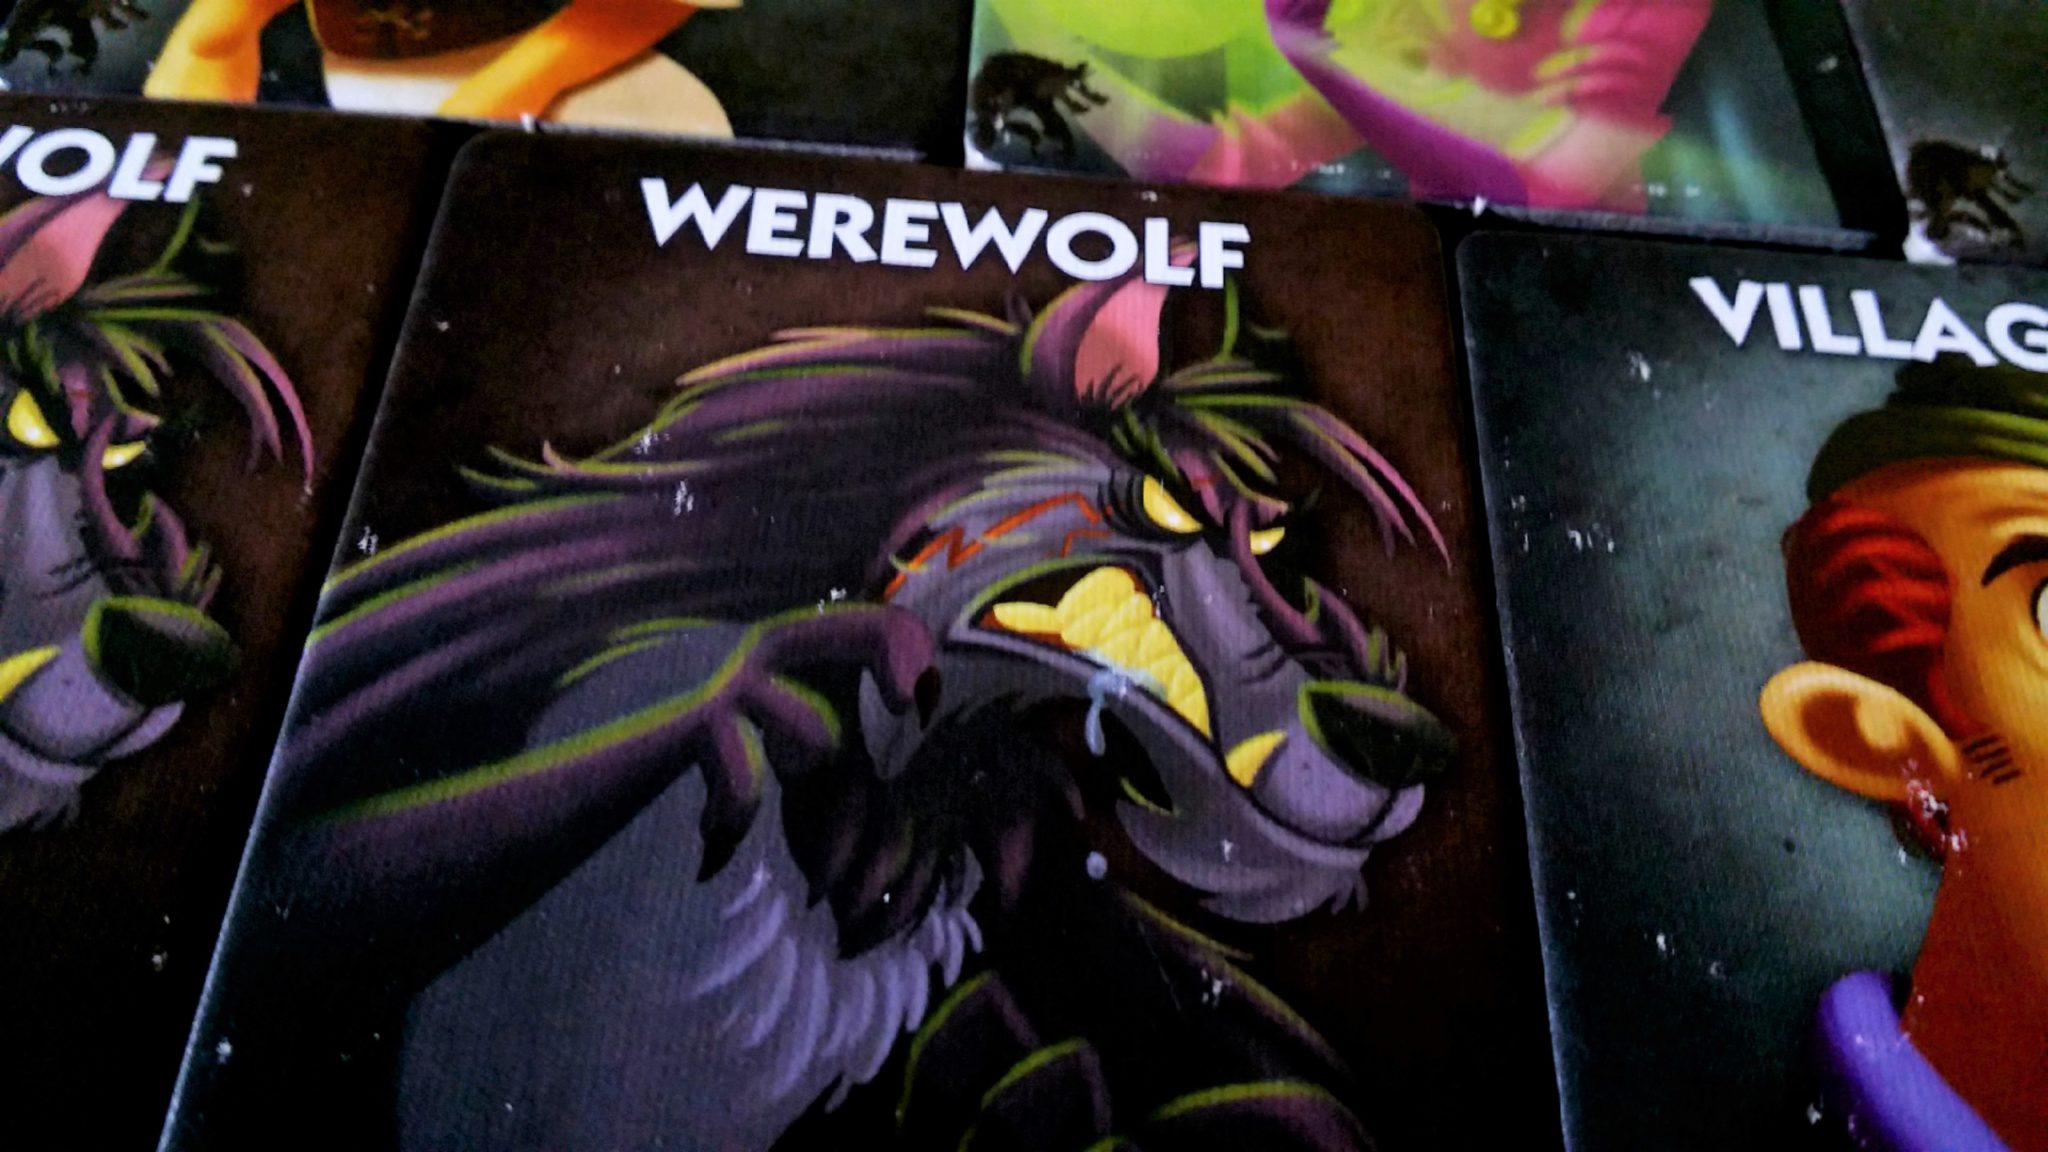 One Night Ultimate Werewolf roles